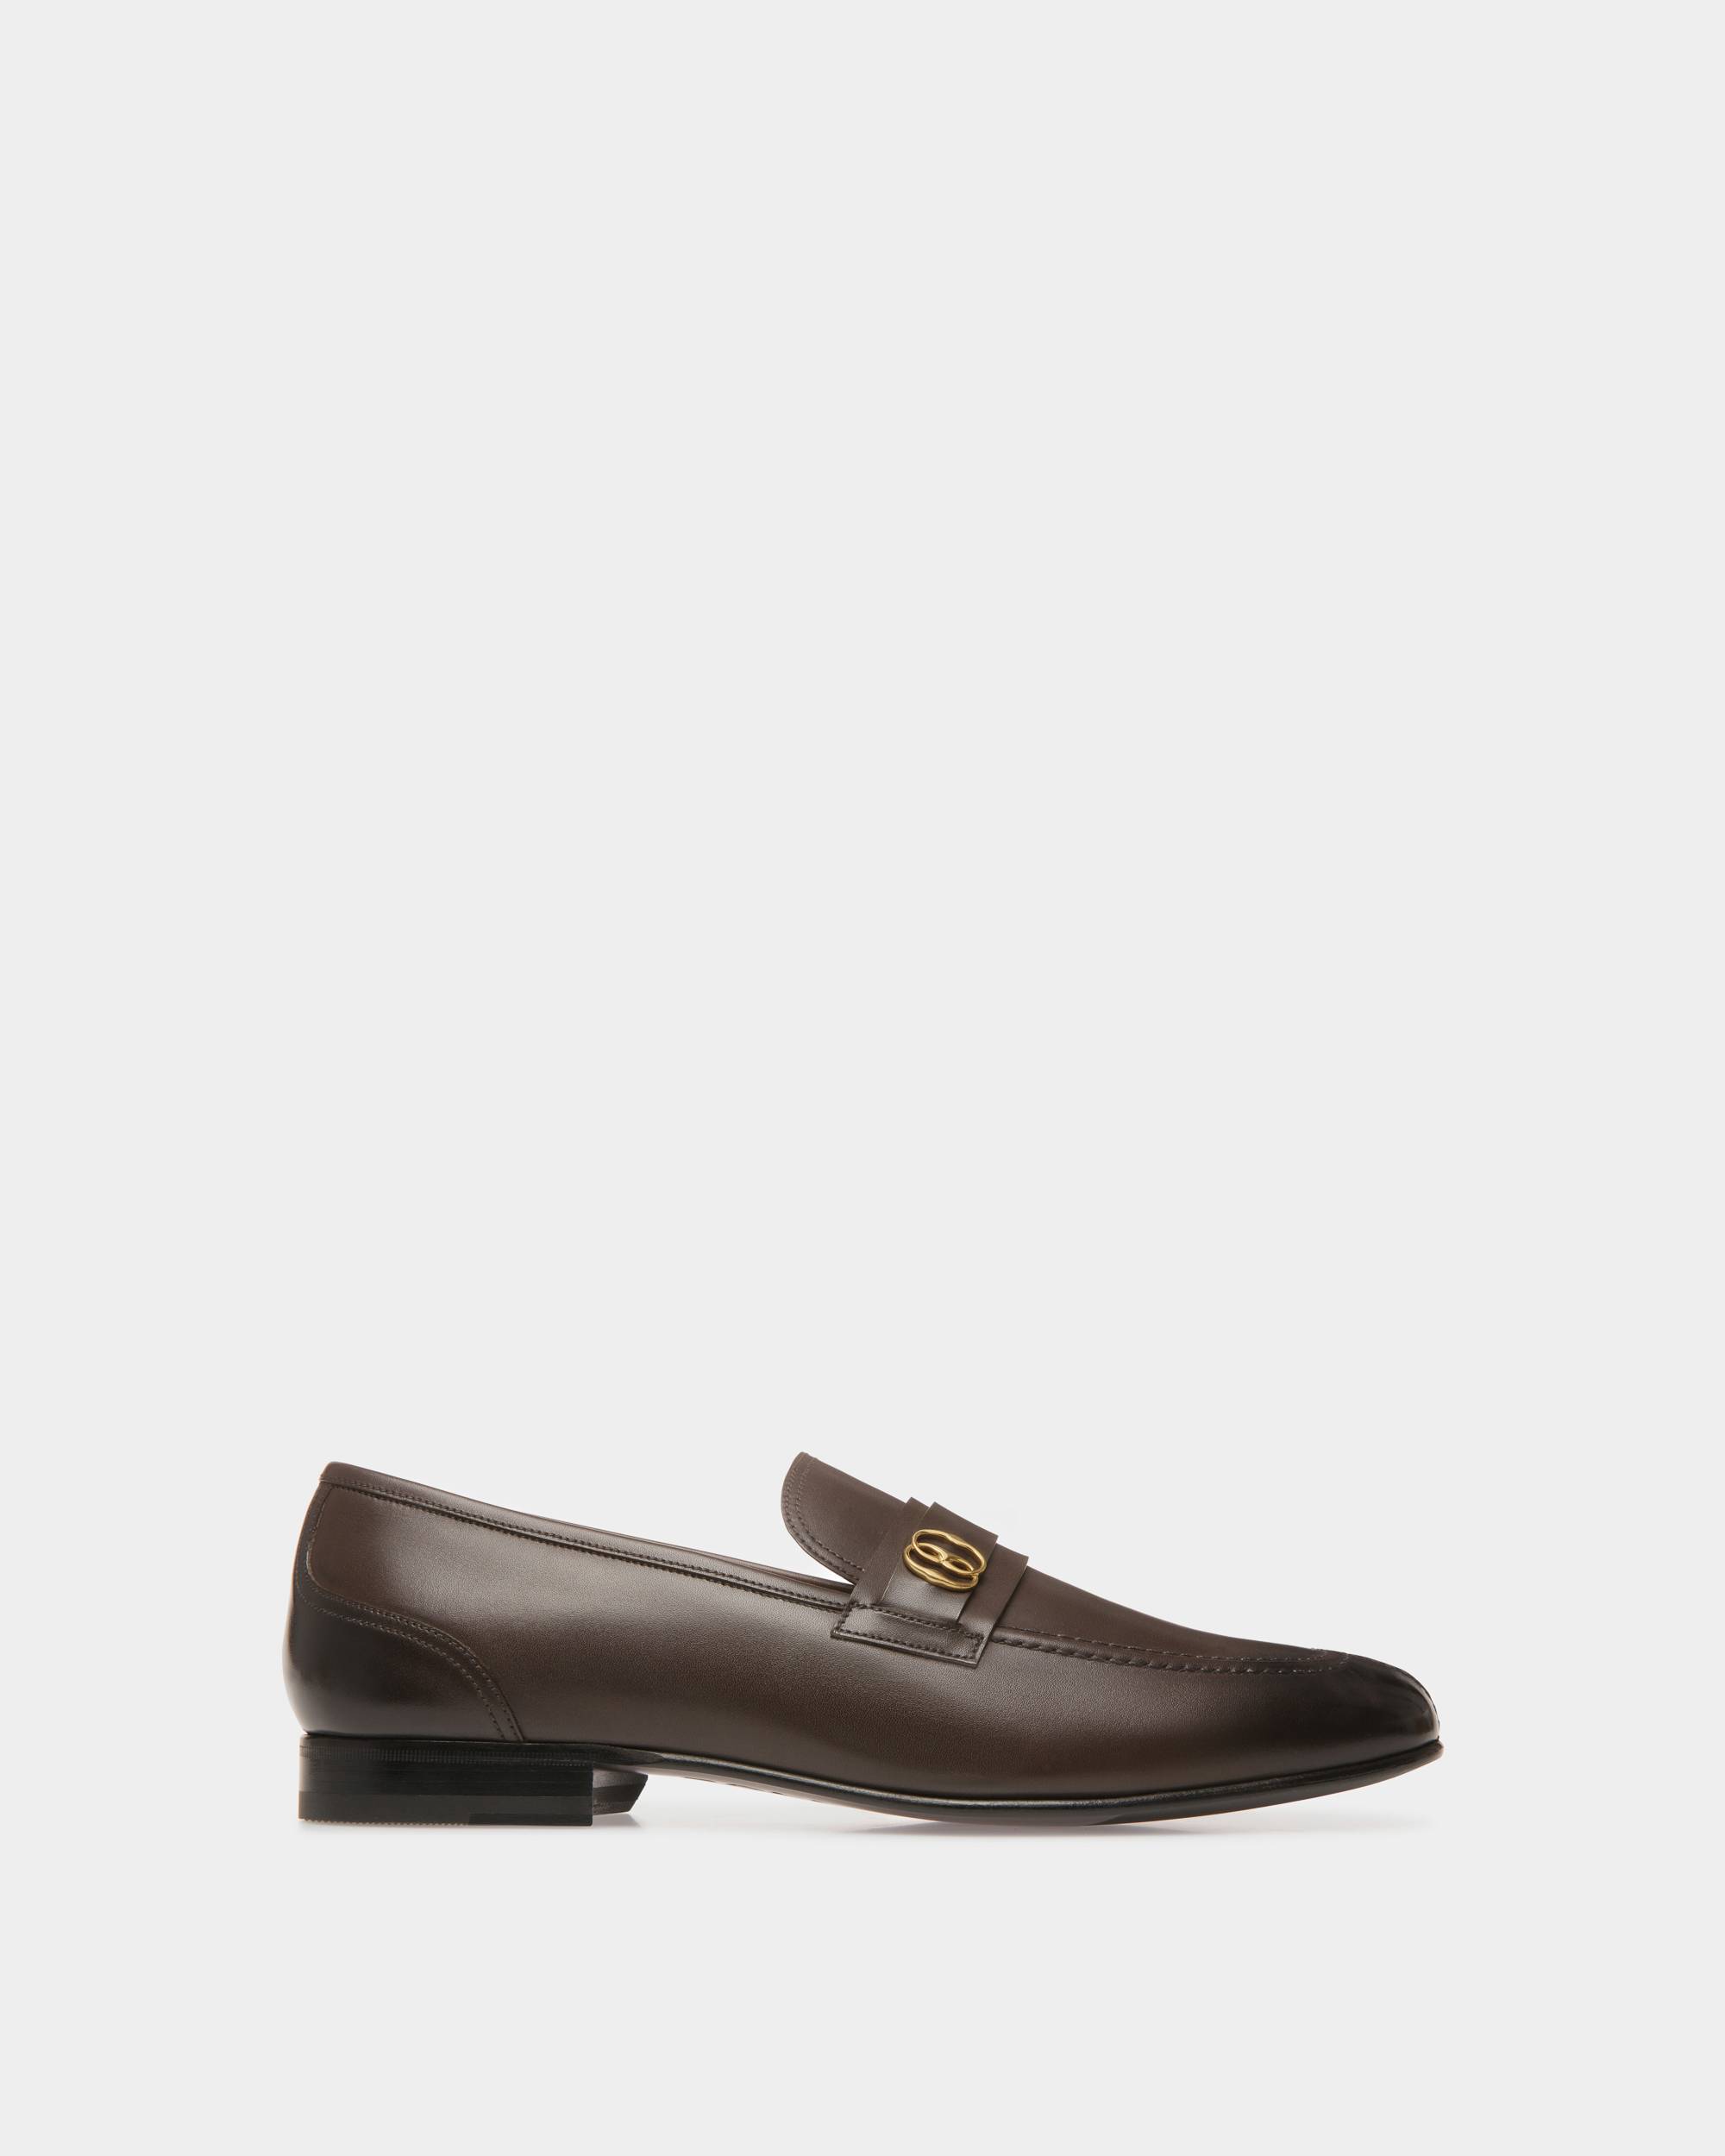 Bally Online Store: Luxury Shoes, and Leather Accessories